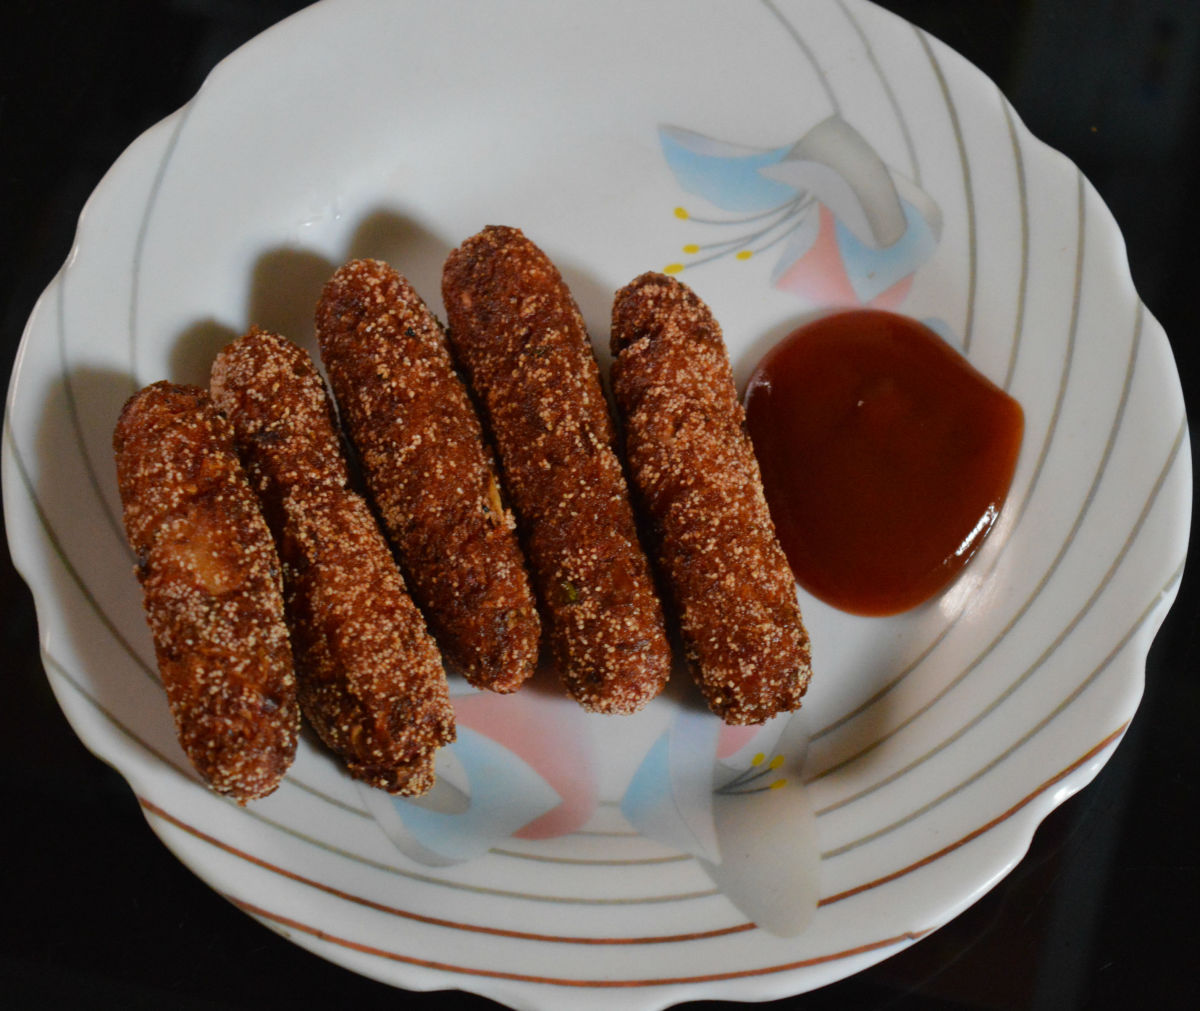 Step two: Mix bread crumbs and semolina. Roll the bullets in it. Deep fry them in medium hot oil for 3-4 minutes. Remove them on absorbent paper. Serve them hot with tomato sauce. They are scrumptious snacks.